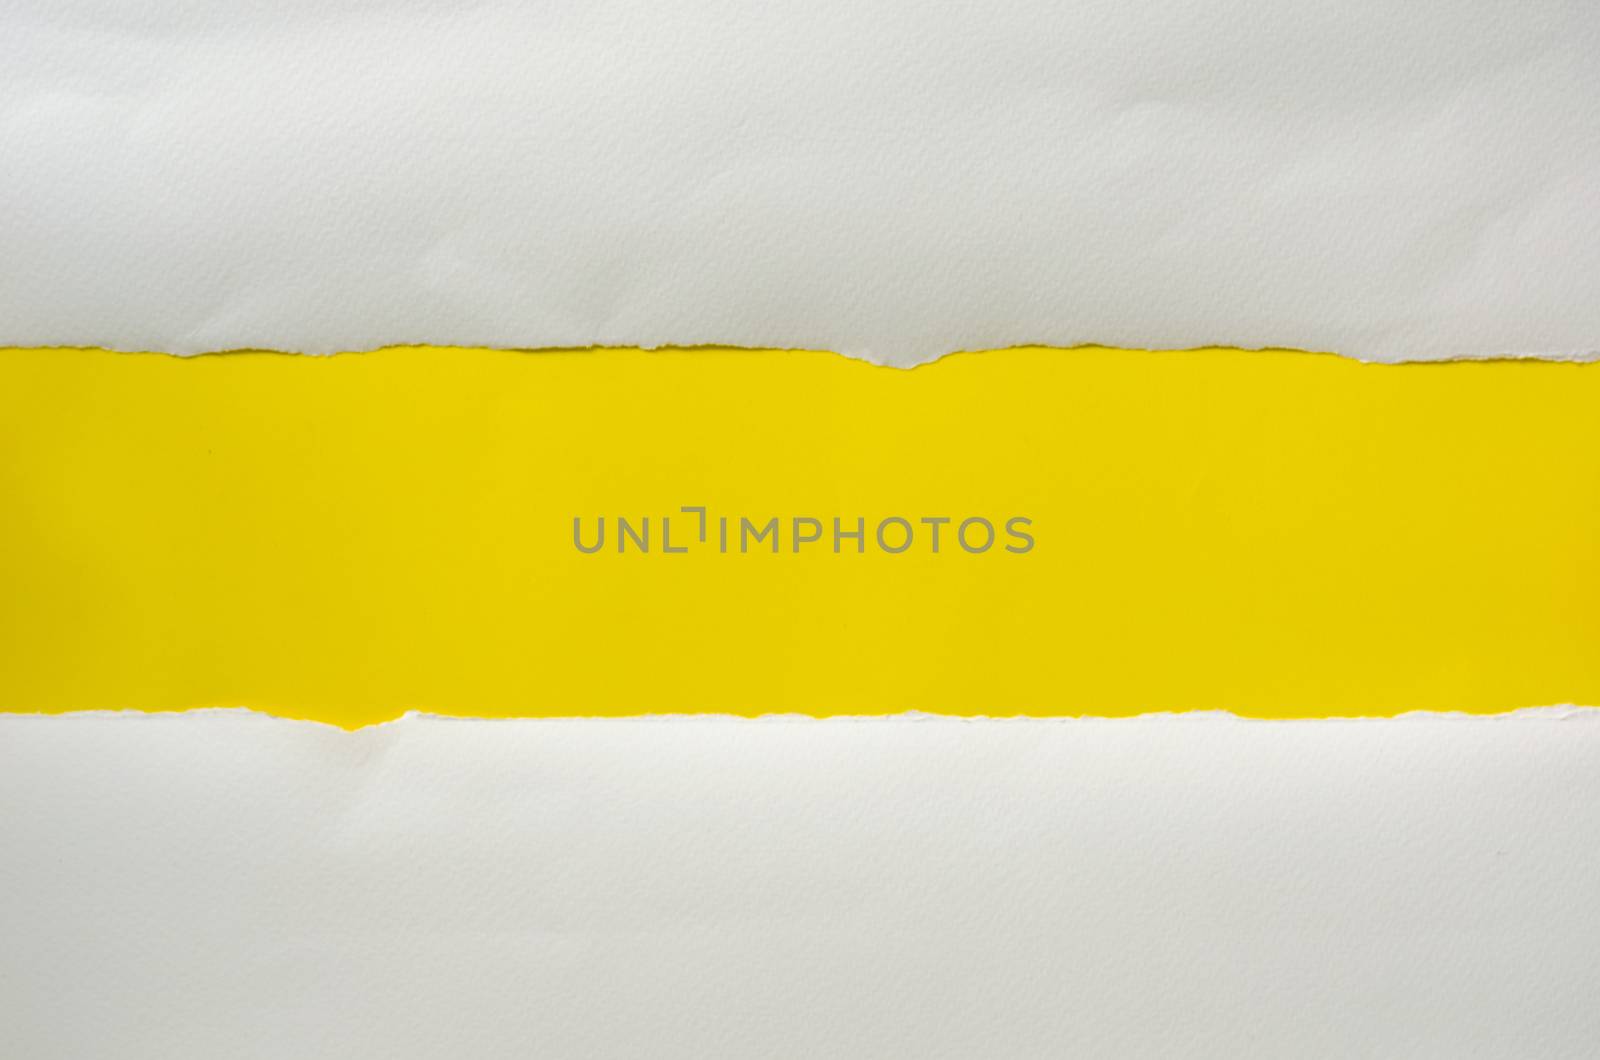 The paper is torn on a yellow background and there is a cutoff t by photobyphotoboy